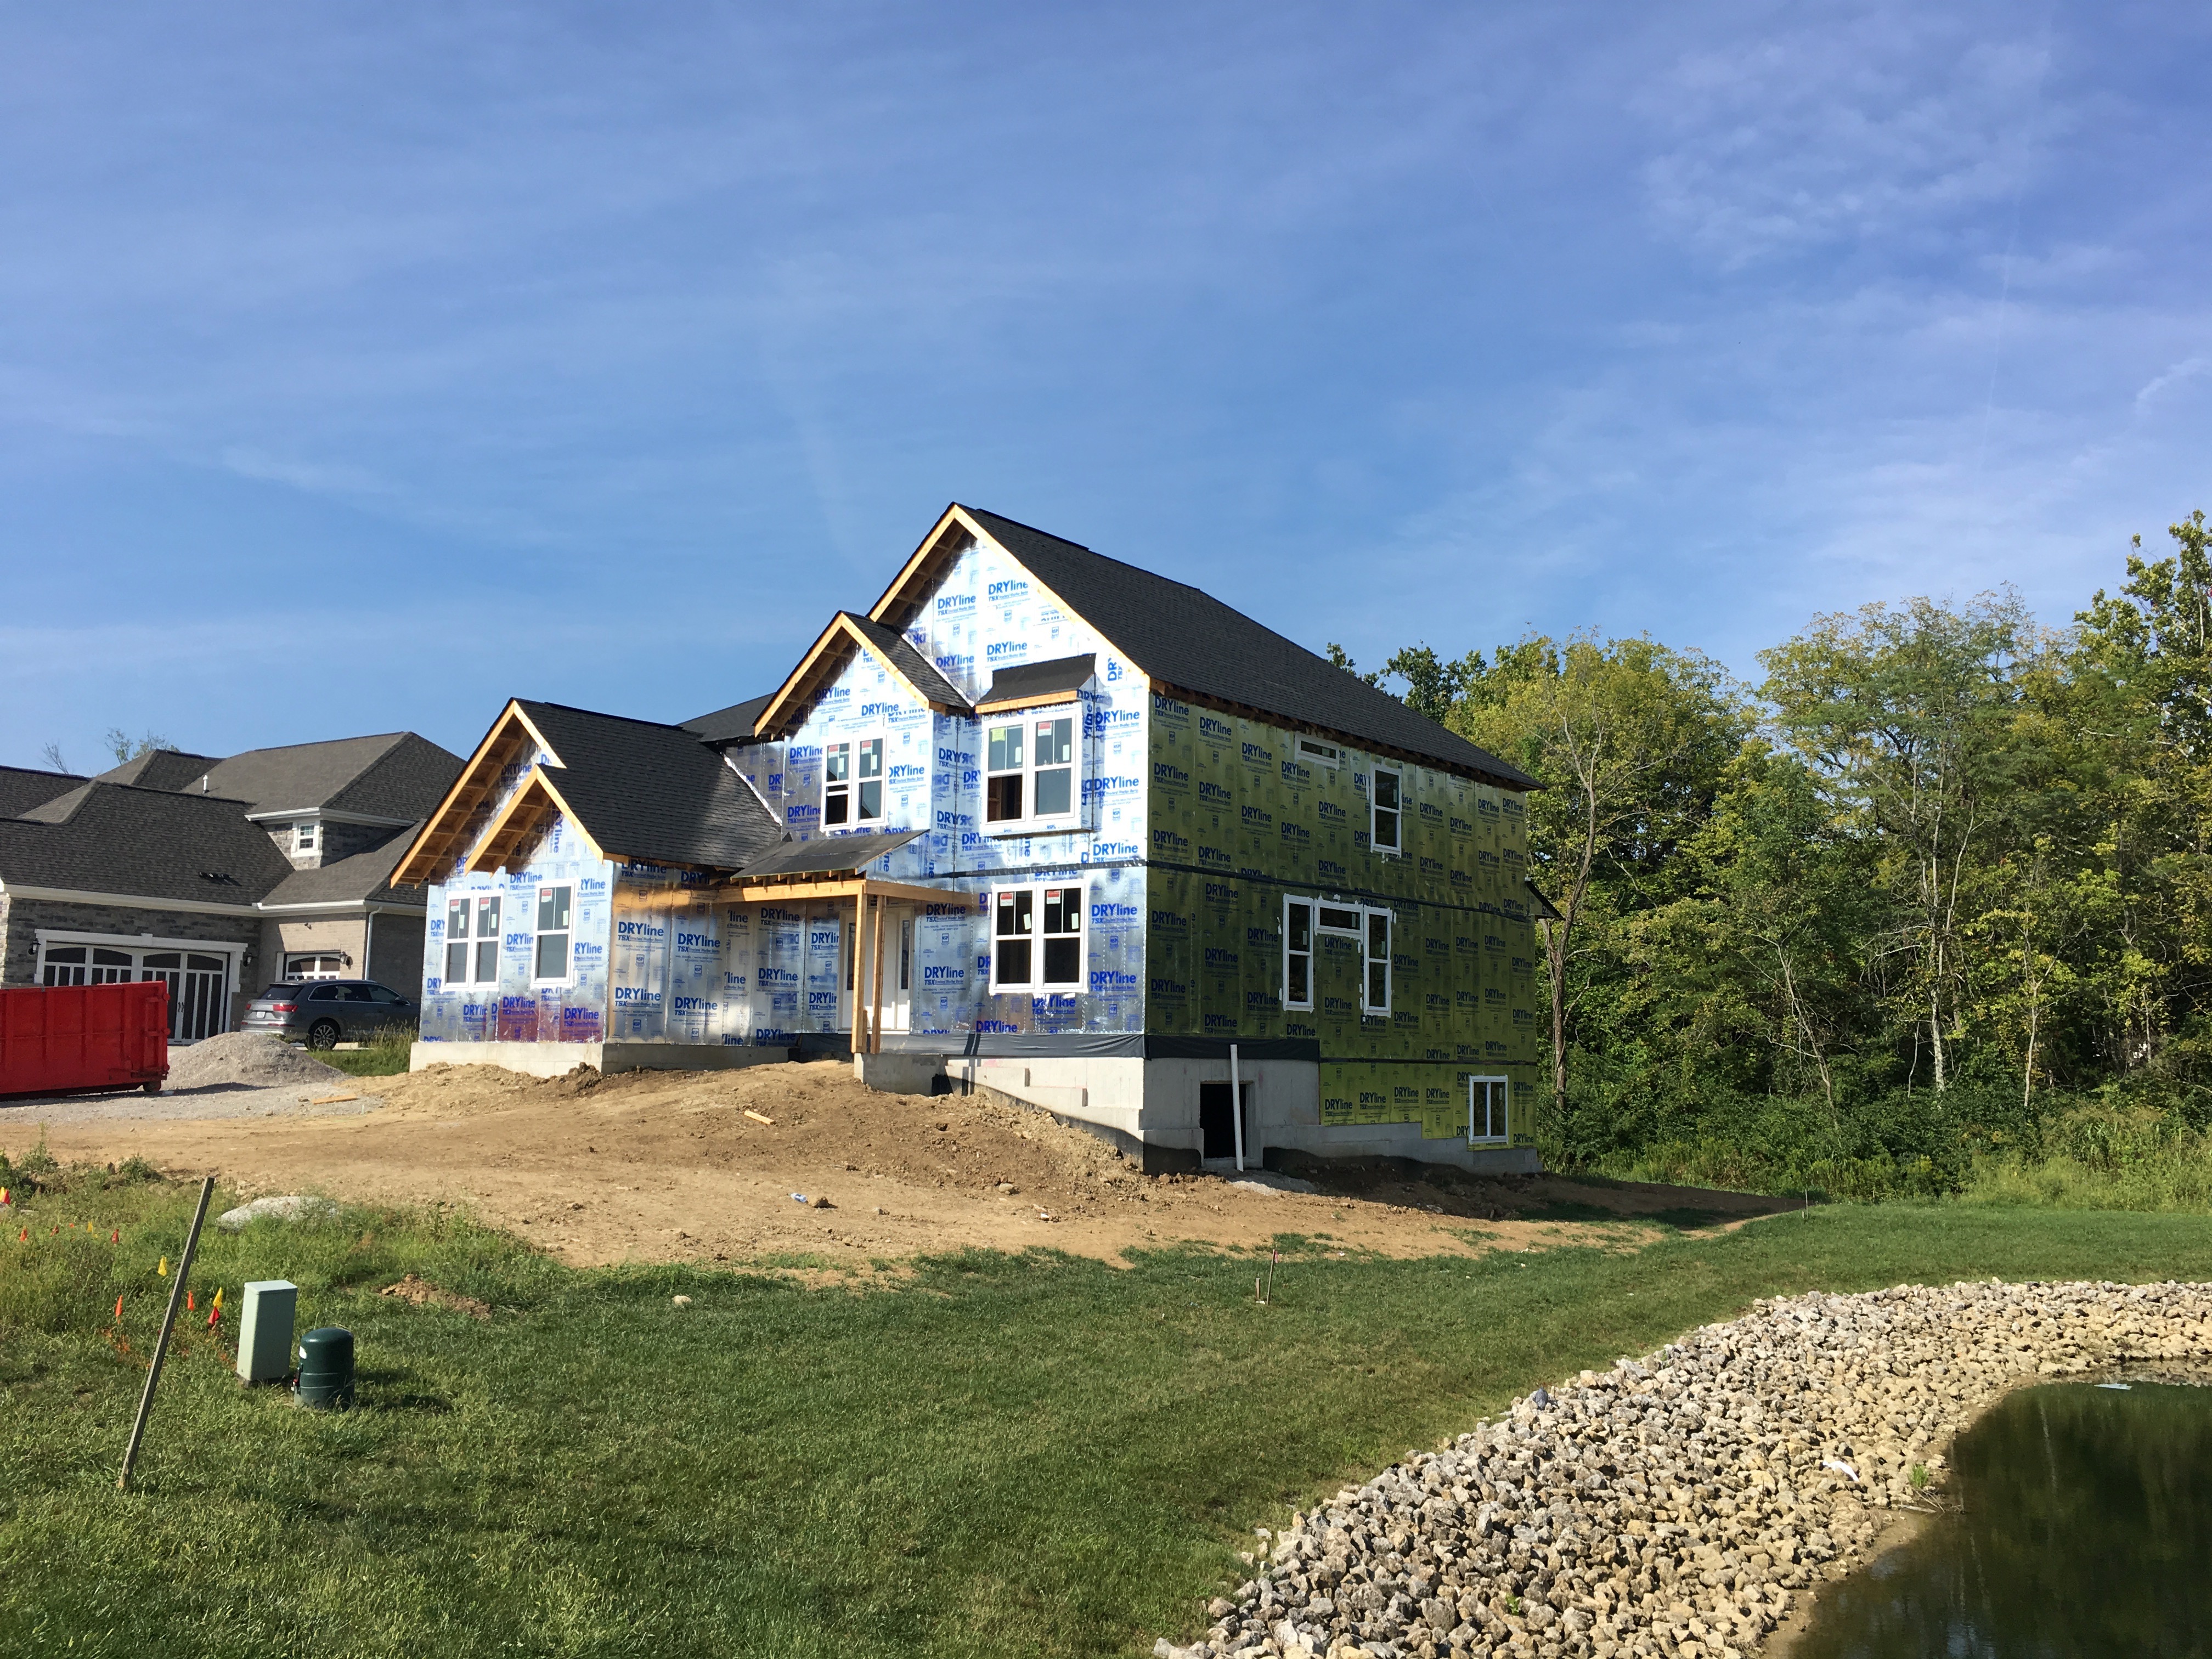 House Update – End of August